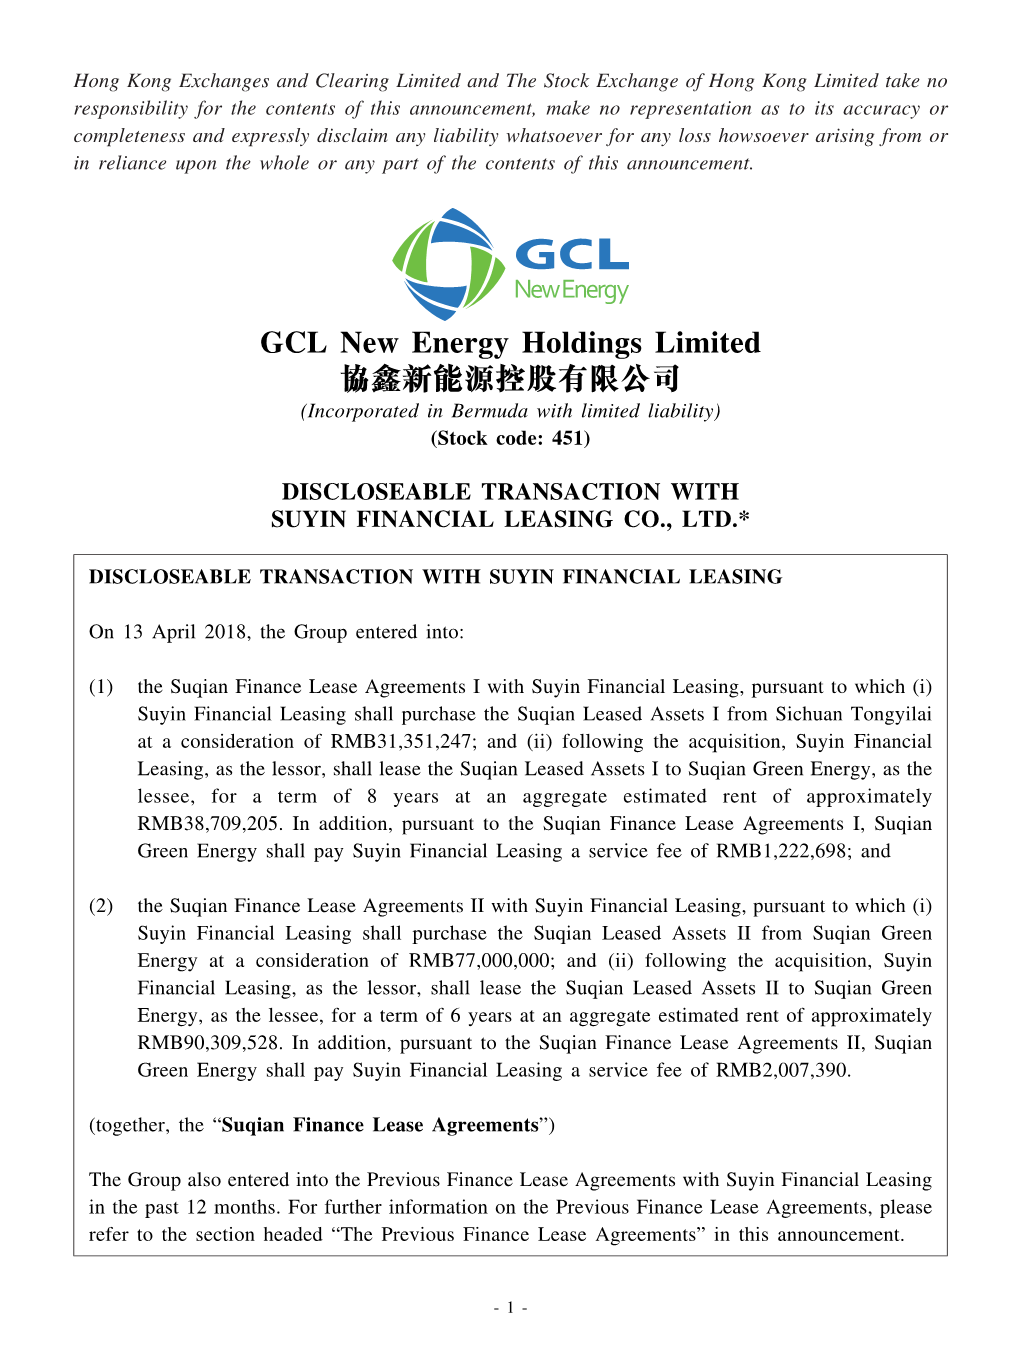 GCL New Energy Holdings Limited 協鑫新能源控股有限公司 (Incorporated in Bermuda with Limited Liability) (Stock Code: 451)